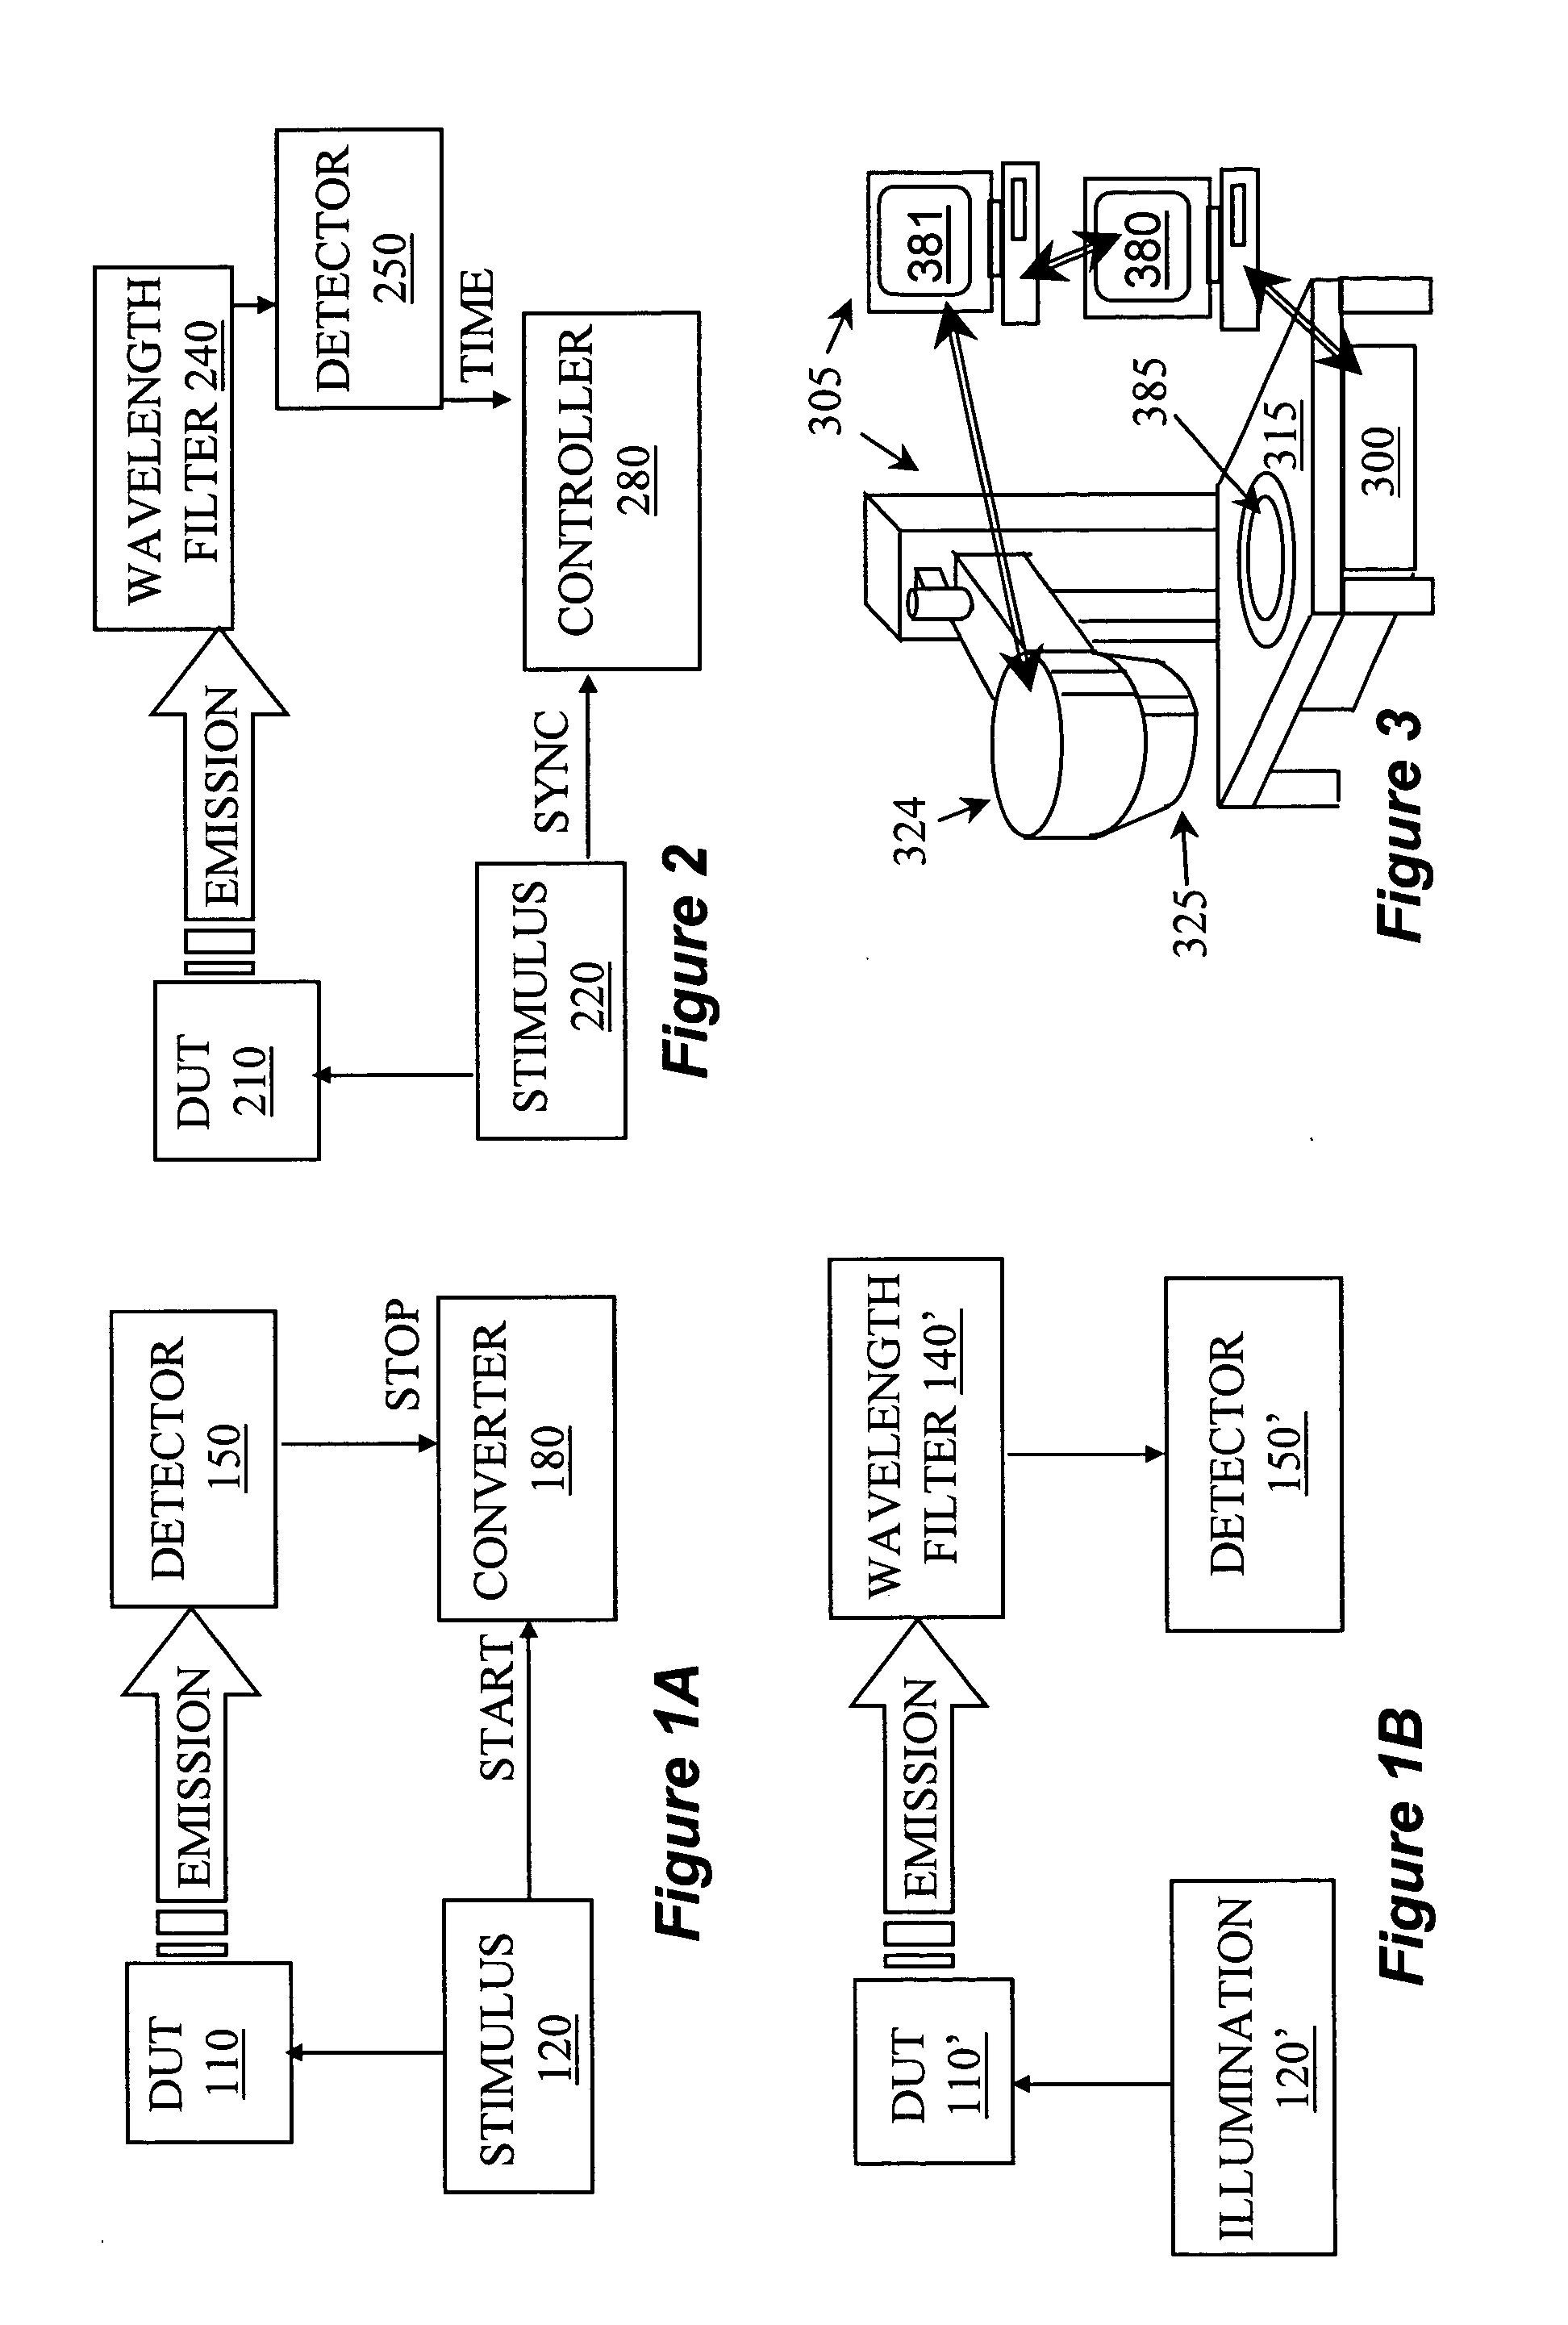 Time resolved emission spectral analysis system